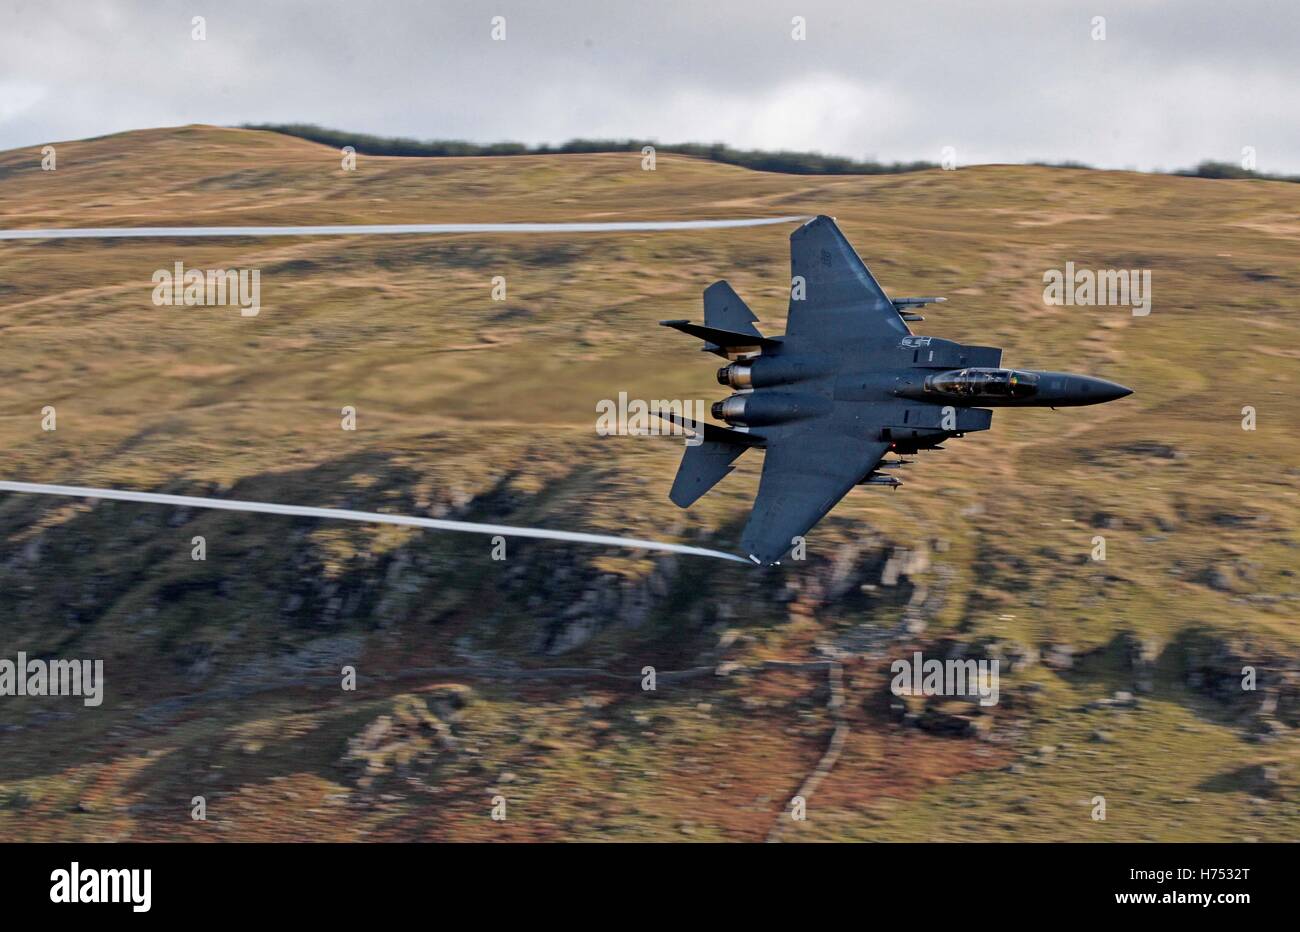 An F-15 jet is seen from Cad West, as it flies low level through the Machynlleth Loop in Wales, a series of valleys notable for their use as low-level training areas for fast jet aircraft. Stock Photo